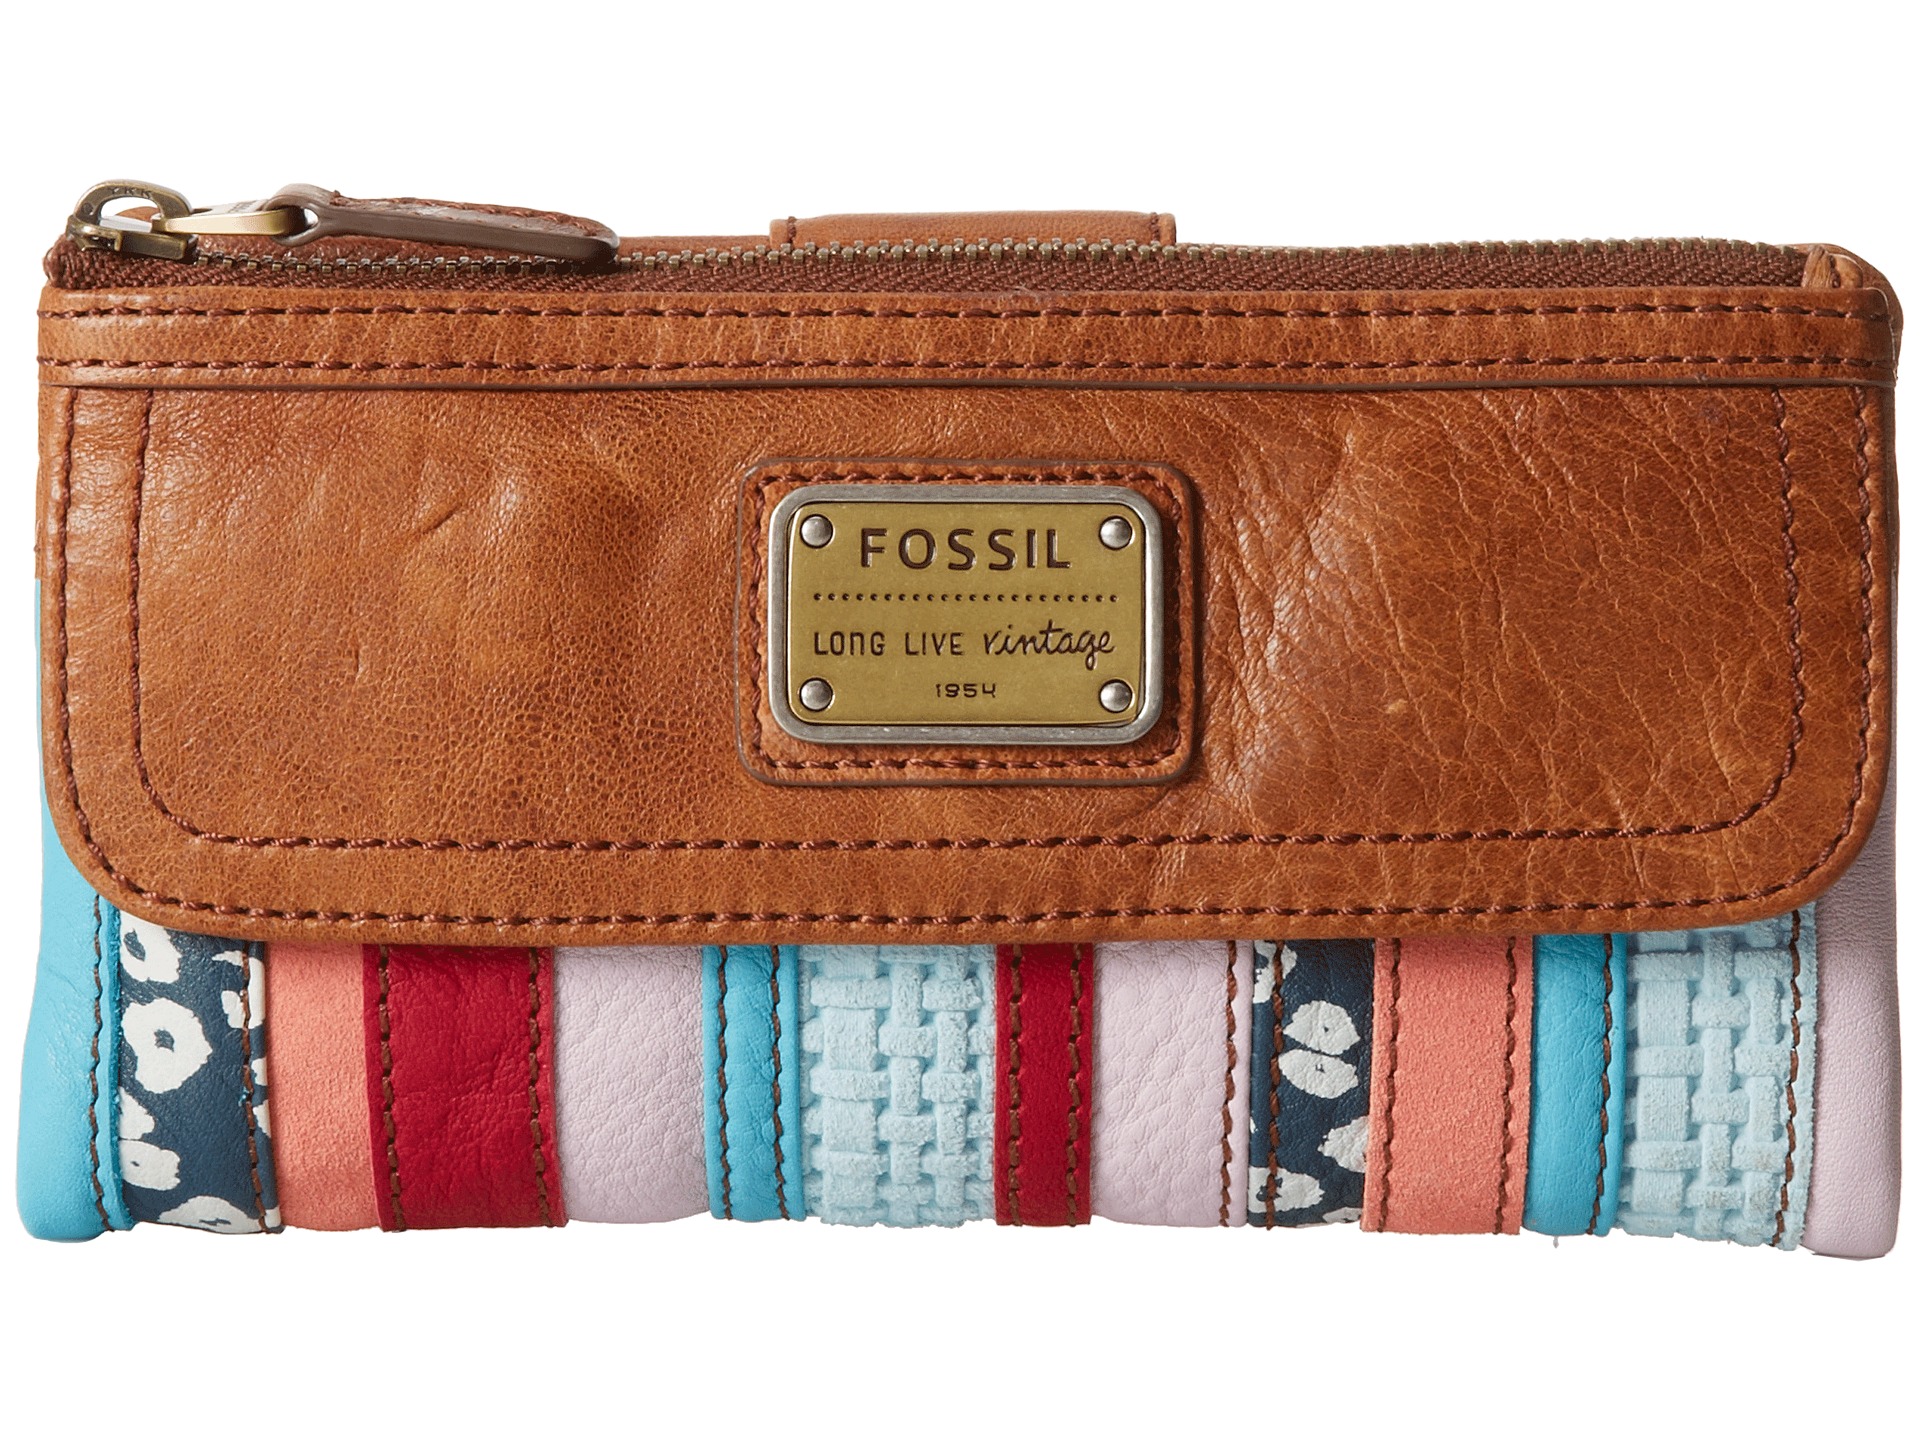 Fossil Emory Clutch Multi 1 - 0 Free Shipping BOTH Ways